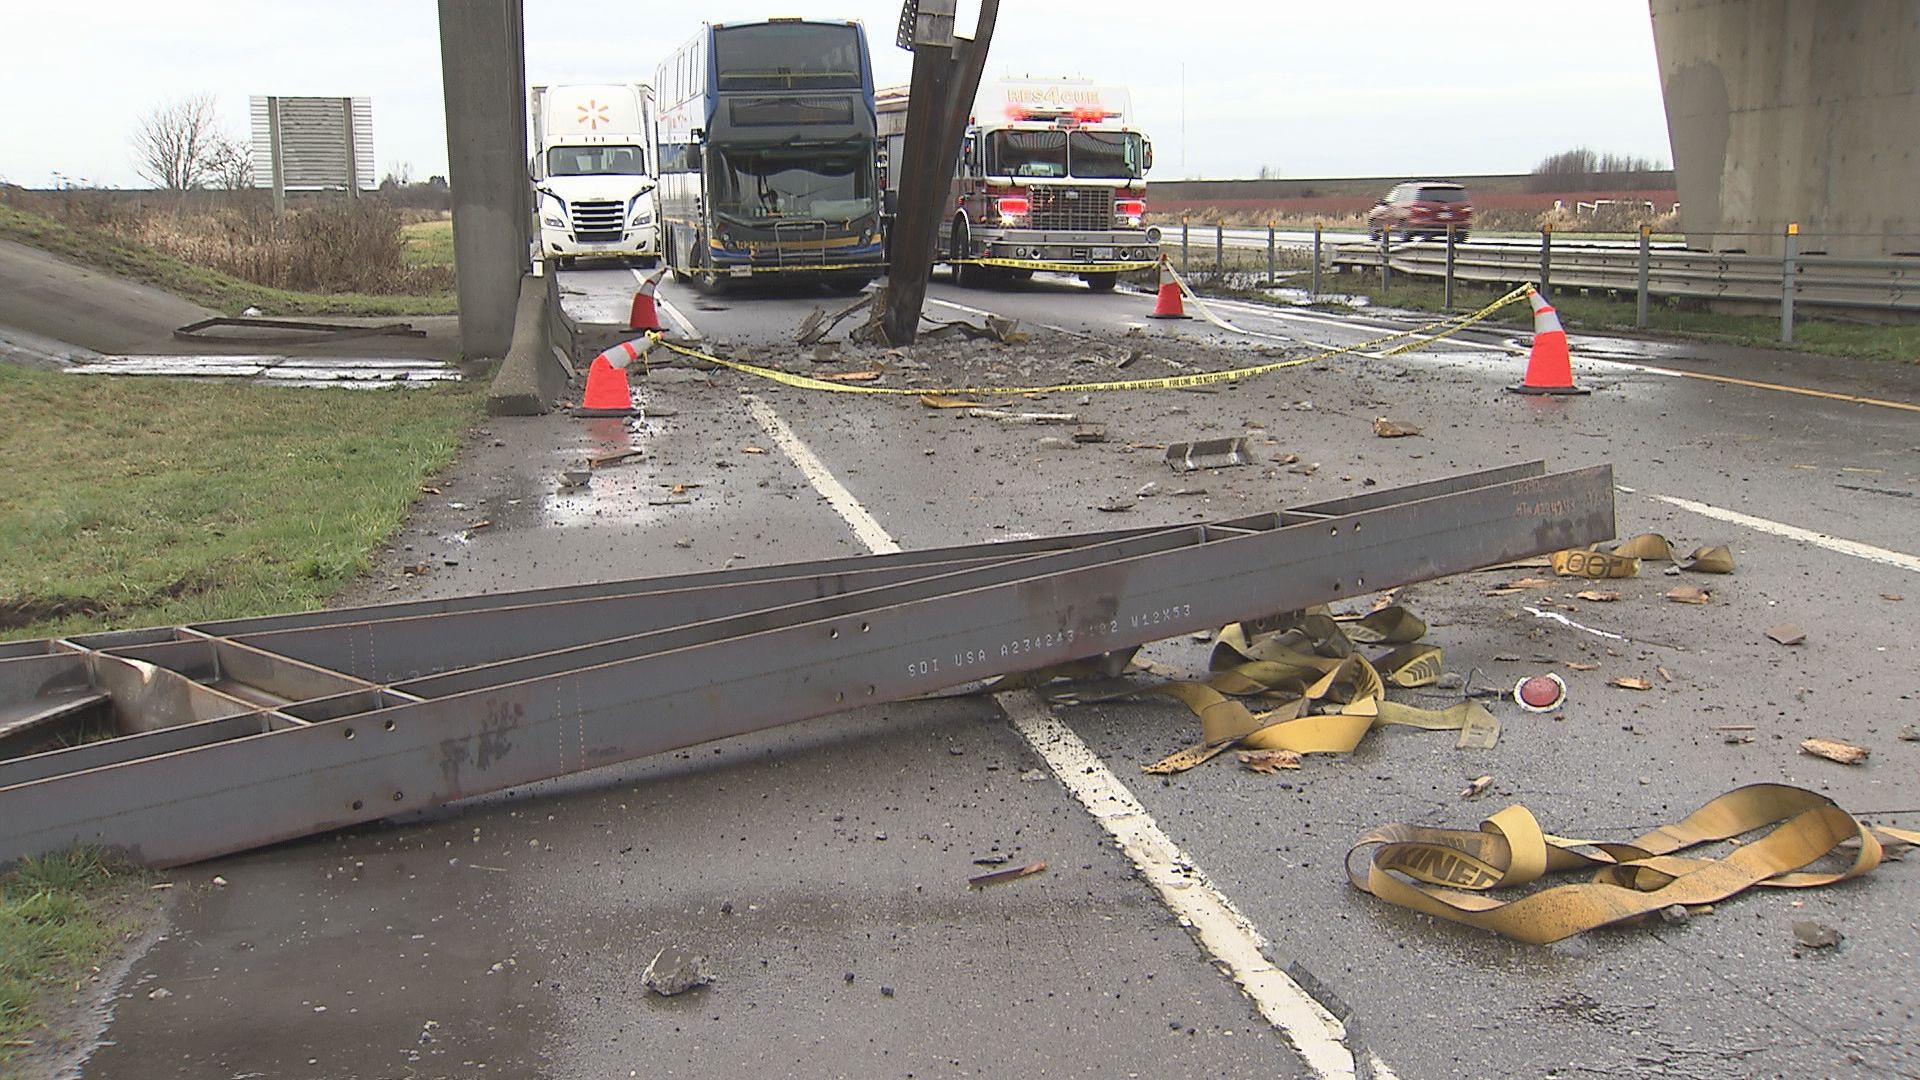 112 Street overpass on Highway 99 after being struck by a semi-truck and trailer